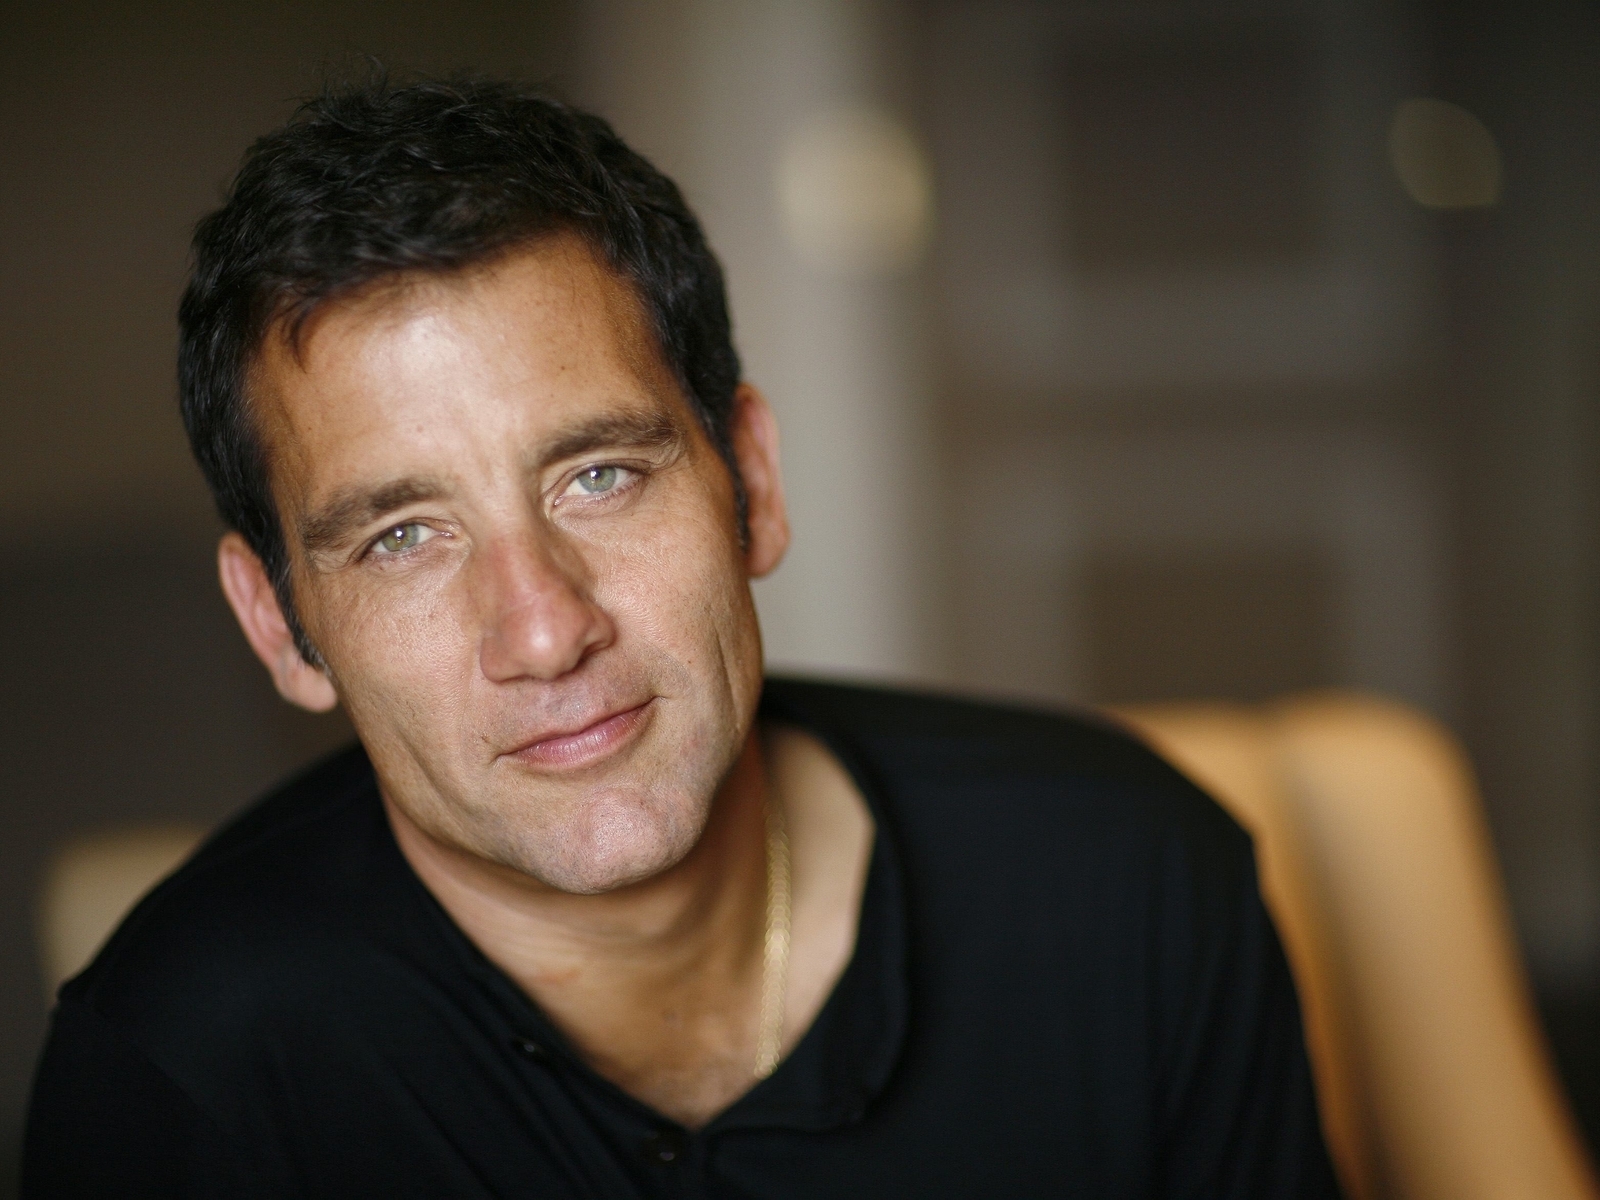 Clive Owen Smile for 1600 x 1200 resolution